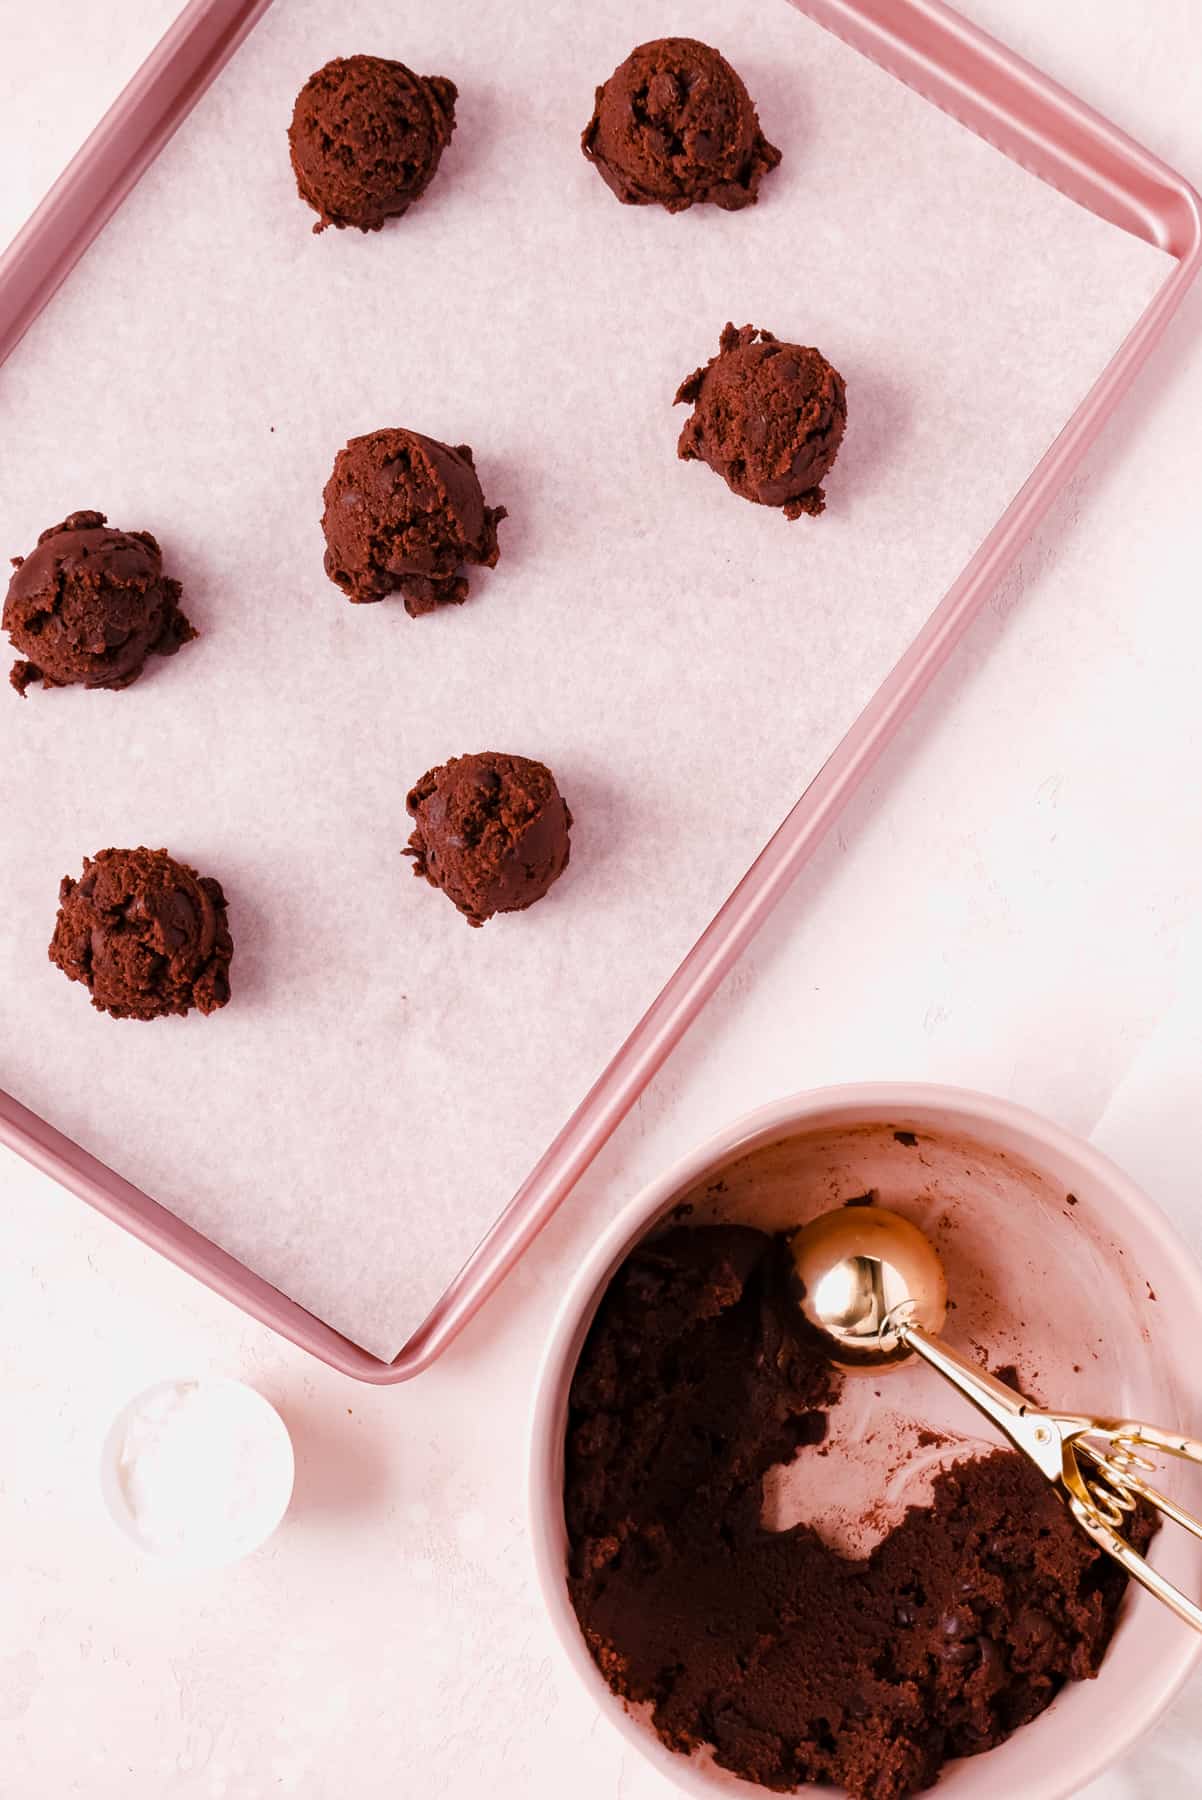 double chocolate chip cookie dough balls scooped and placed on parchment lined pink baking tray.